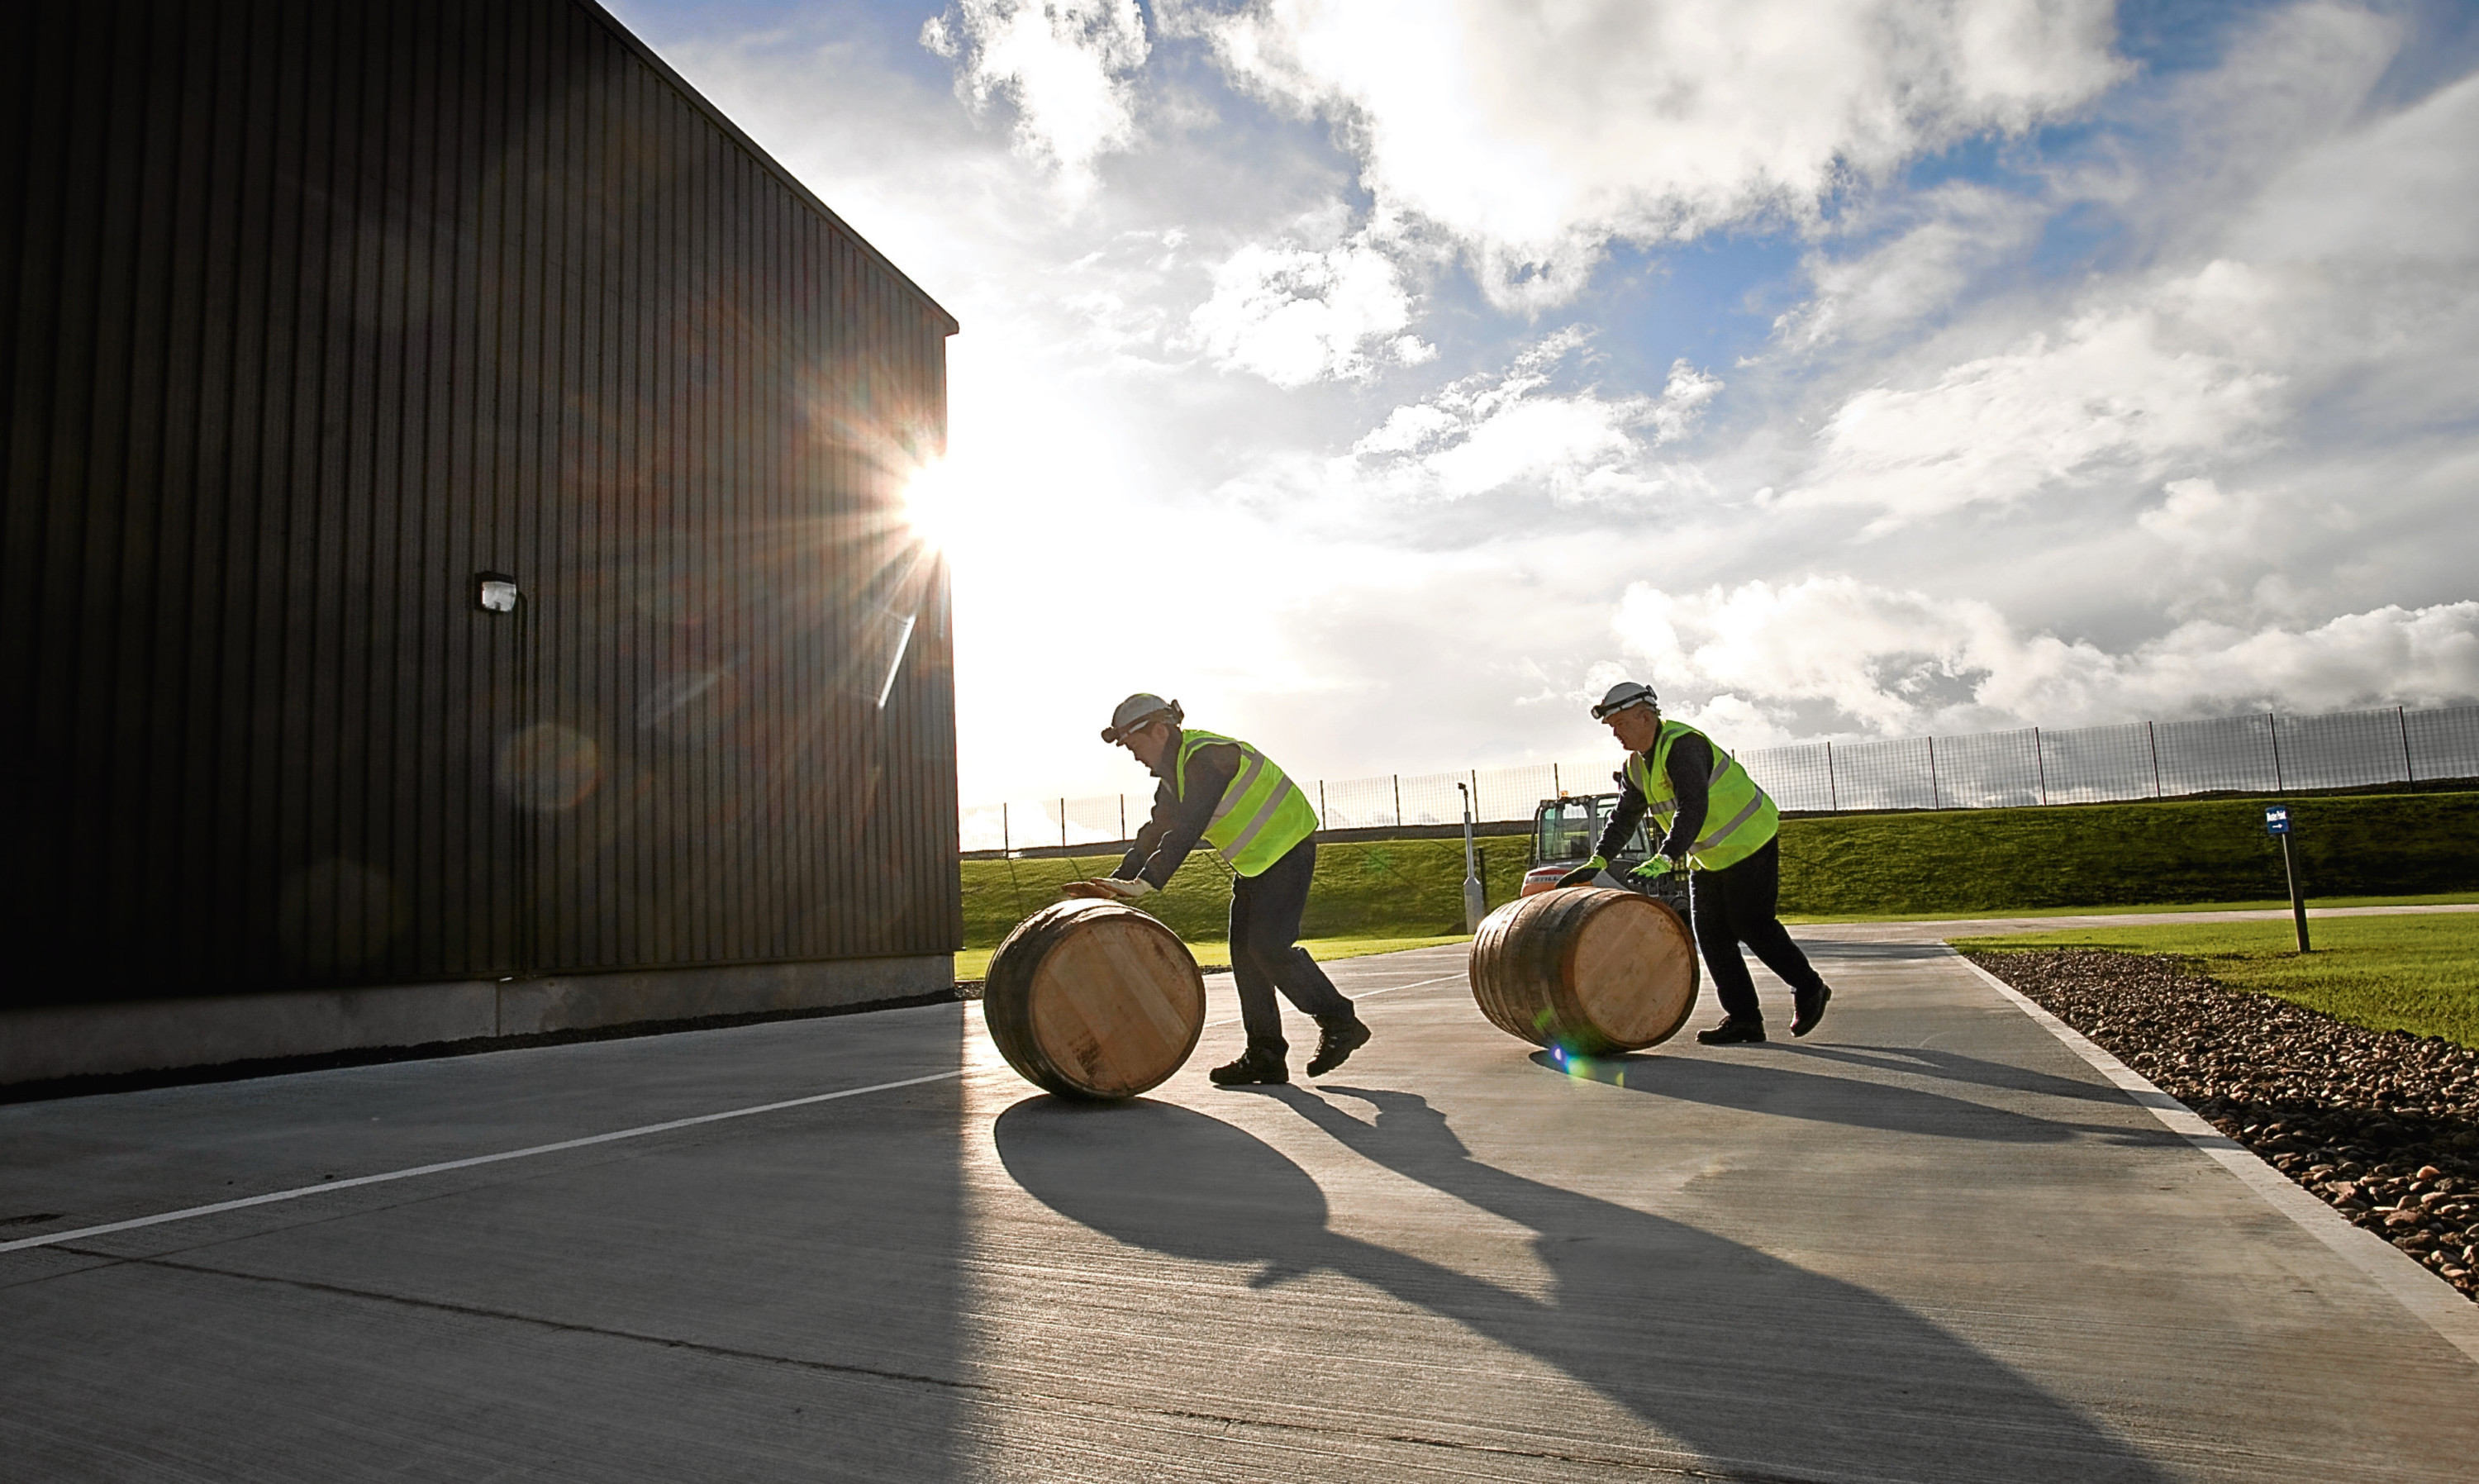 Whisky being laid down to mature at Diageo's Cluny bond near Kirkcaldy